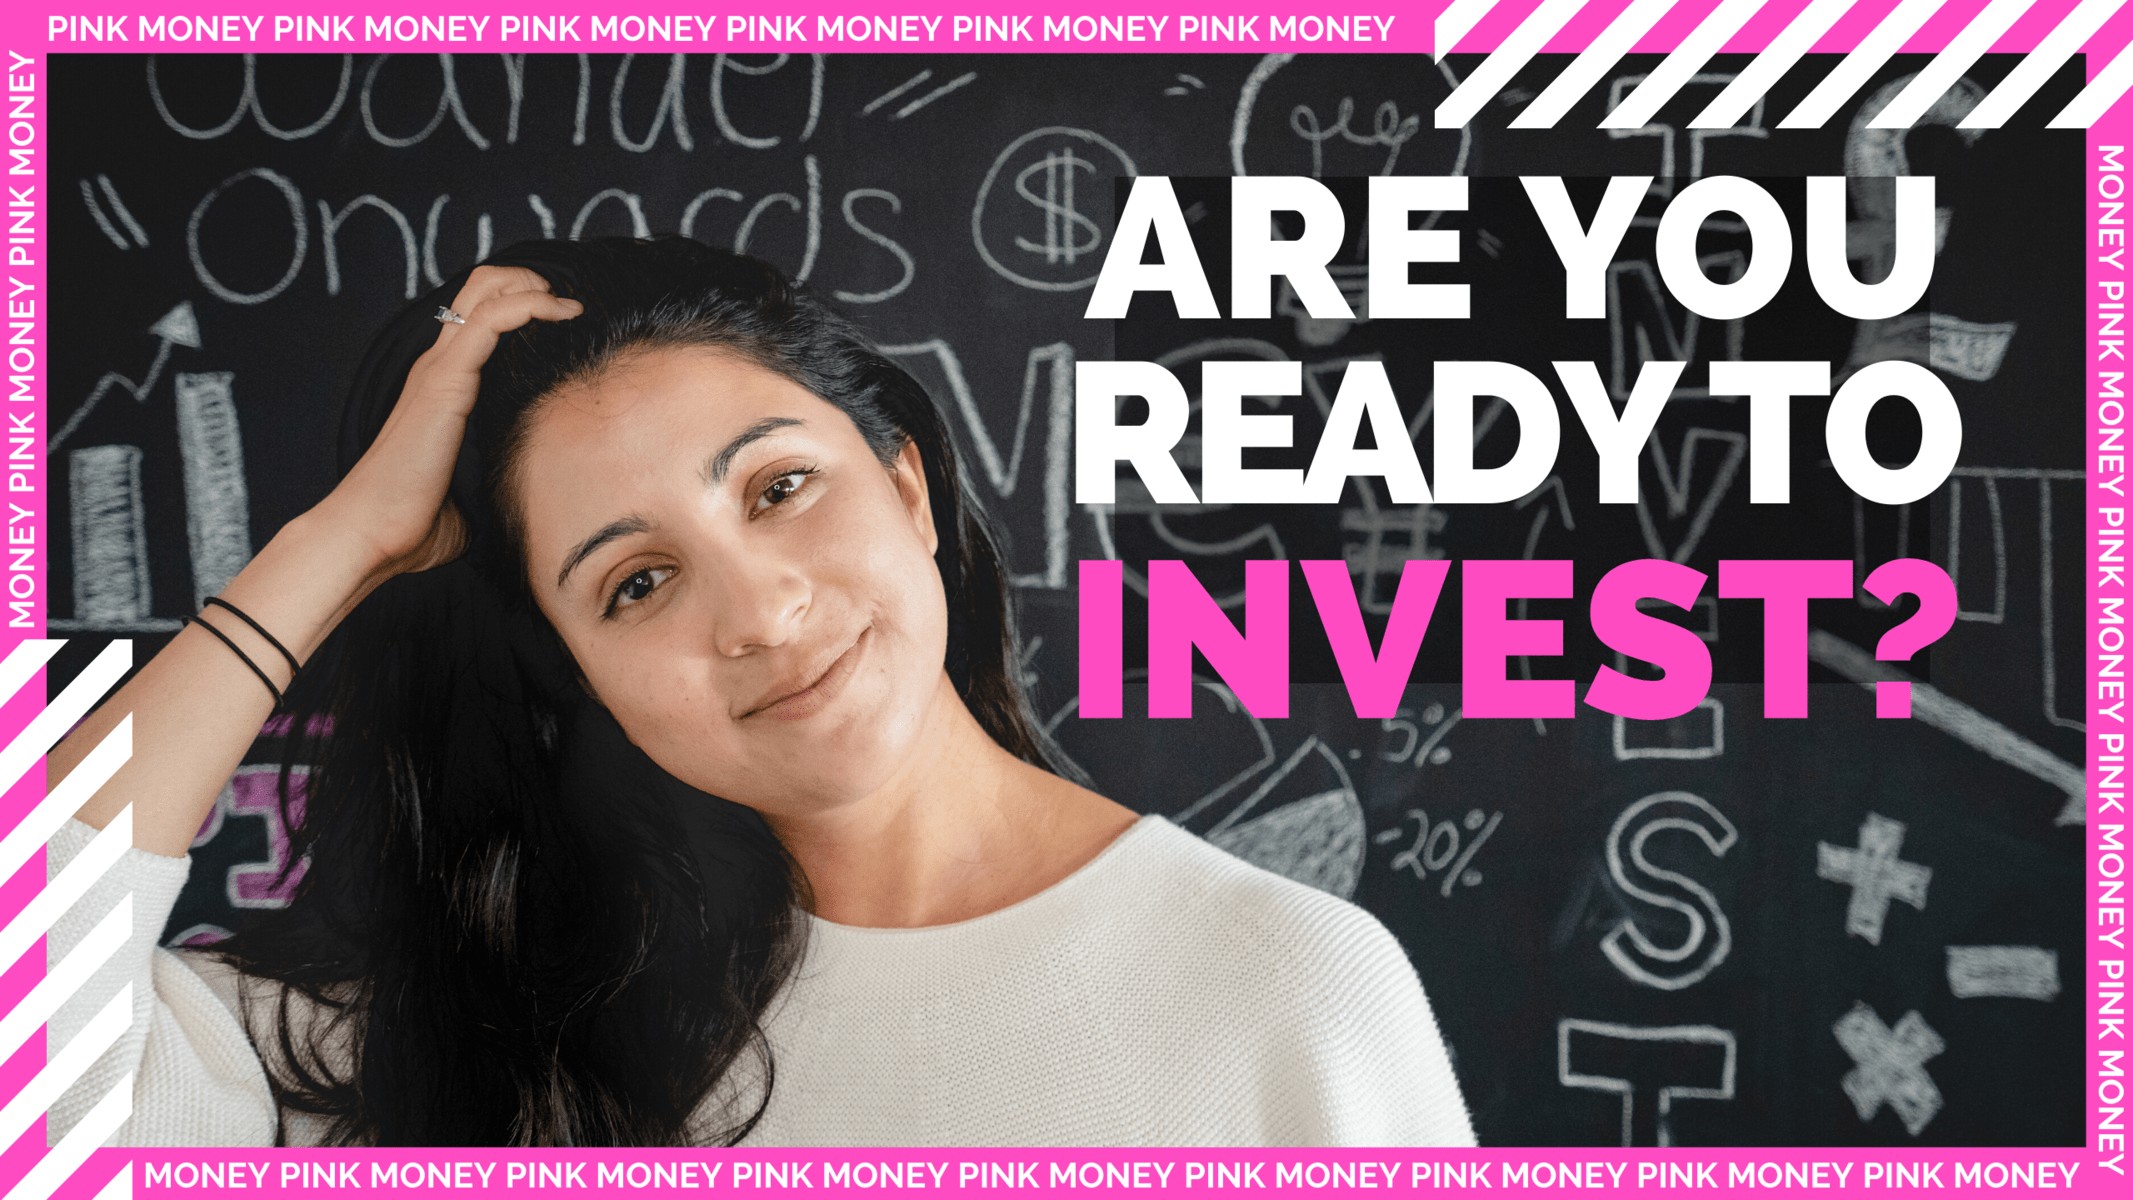 Women: Should You Start Investing?